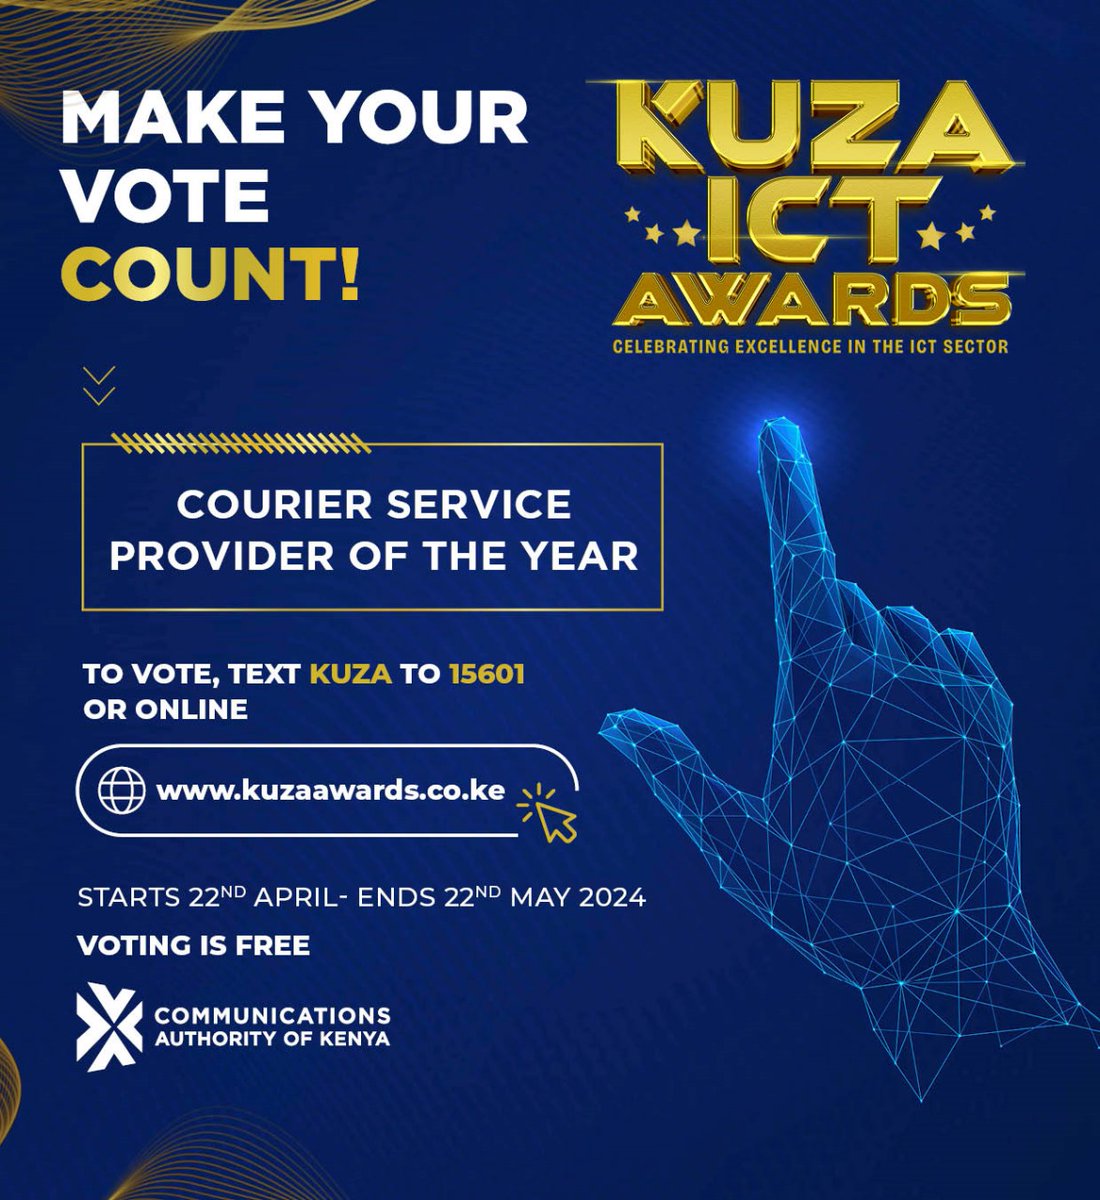 Needing a reliable courier service? Who impresses you with innovative options and great customer care? Cast your vote for the best in the business! Text 'KUZA' to 15601 or visit Kuza Awards: kuzaawards.co.ke Vote now! #KuzaICTAwards2024 @CA_DGOfficial